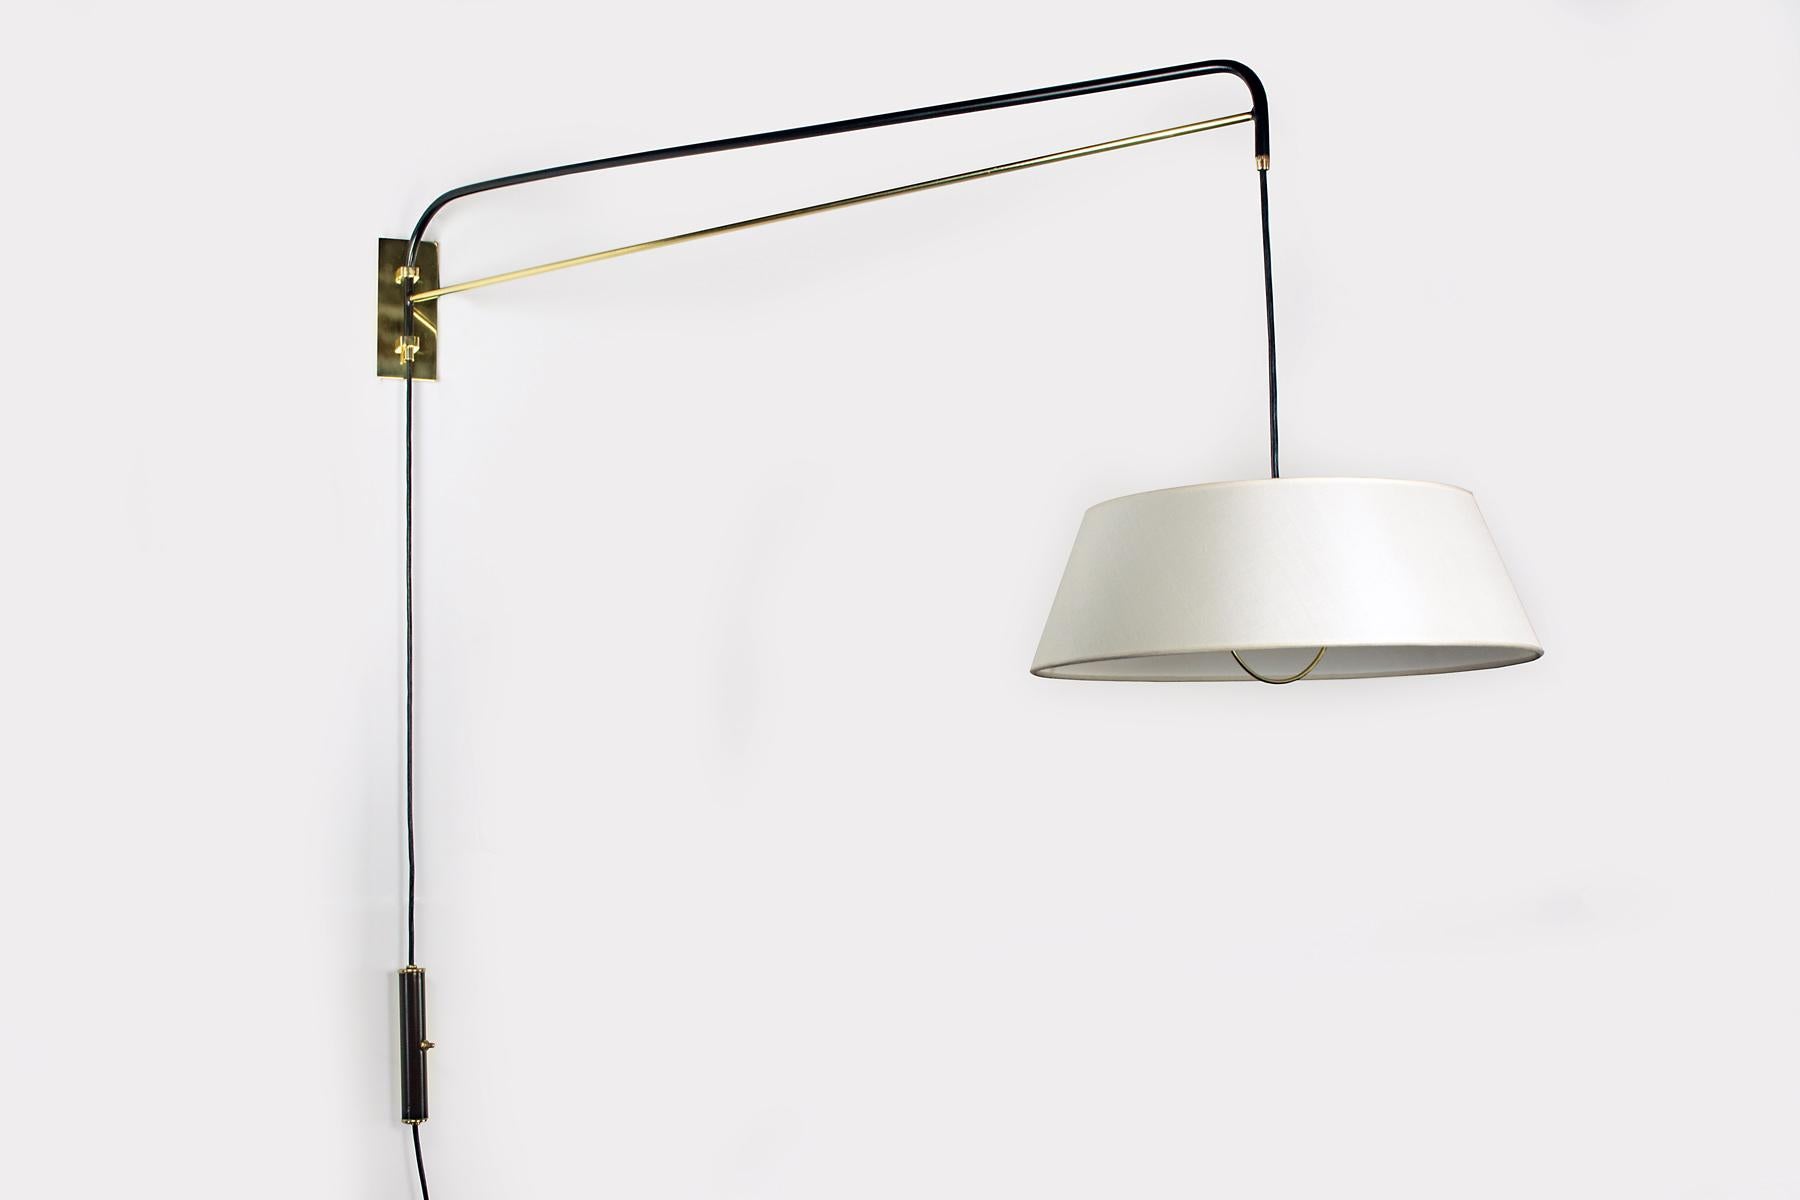 This graceful wall sconce is handcrafted by Bourgeois Boheme Atelier. It is made with a black enamel finish and polished brass. An elegant linen shade diffuses a soft light. This fixture is adjustable, the switched counter weight system allow for